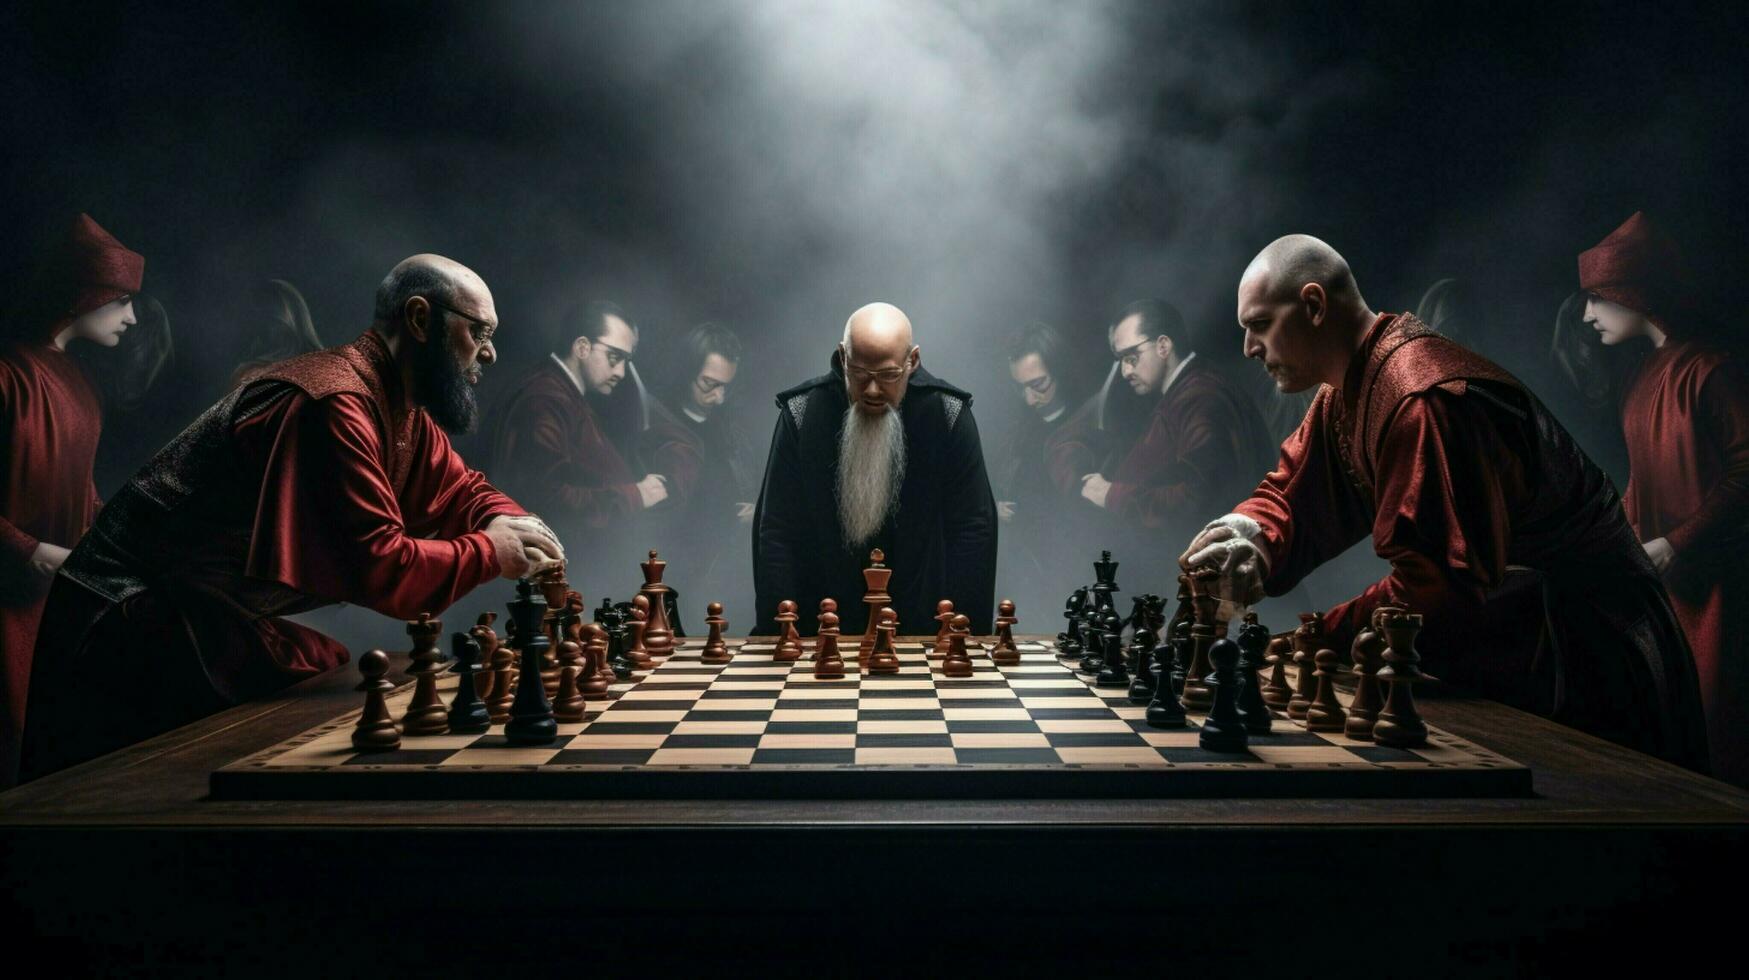 men battle on chess board teamwork stands out photo